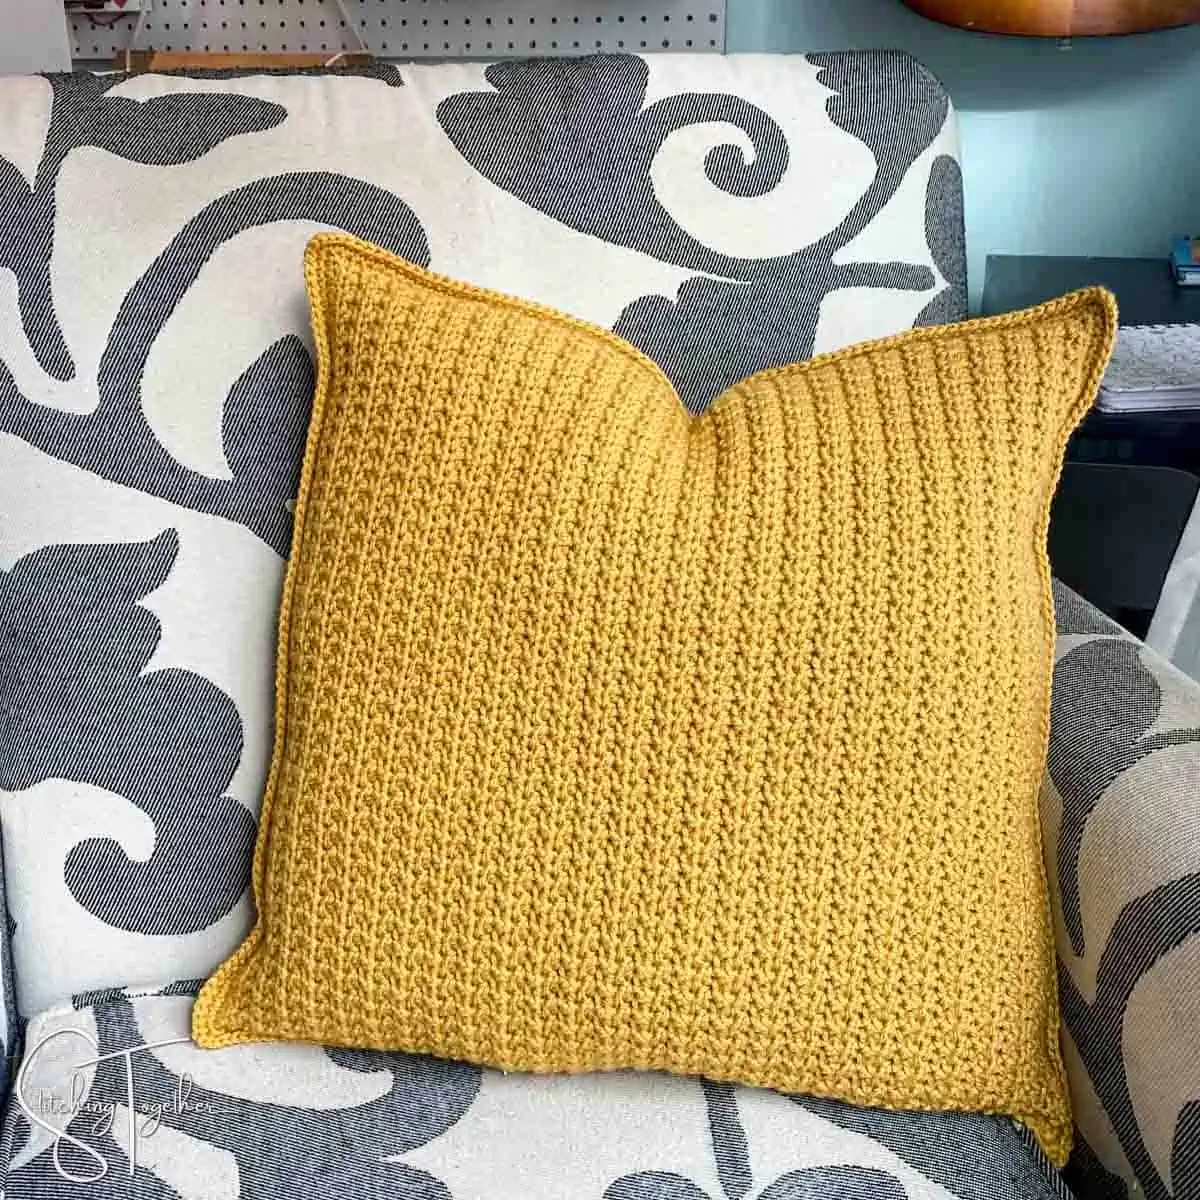 mustard colored crochet pillow on a chair